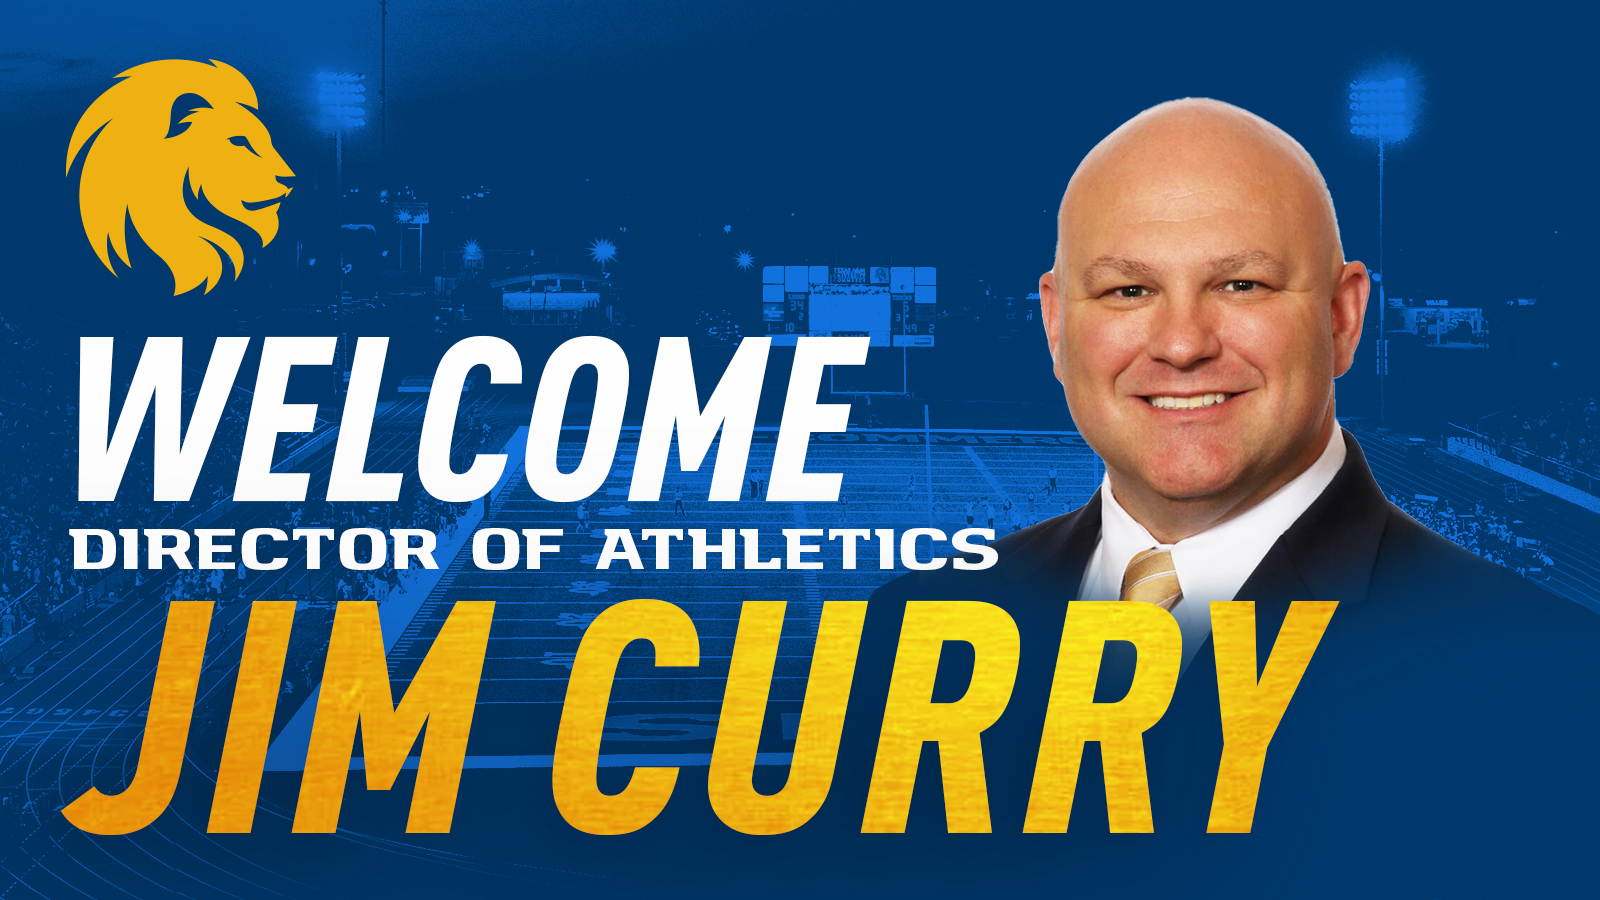 Texas A&M University-Commerce Welcomes Director of Athletics Jim Curry